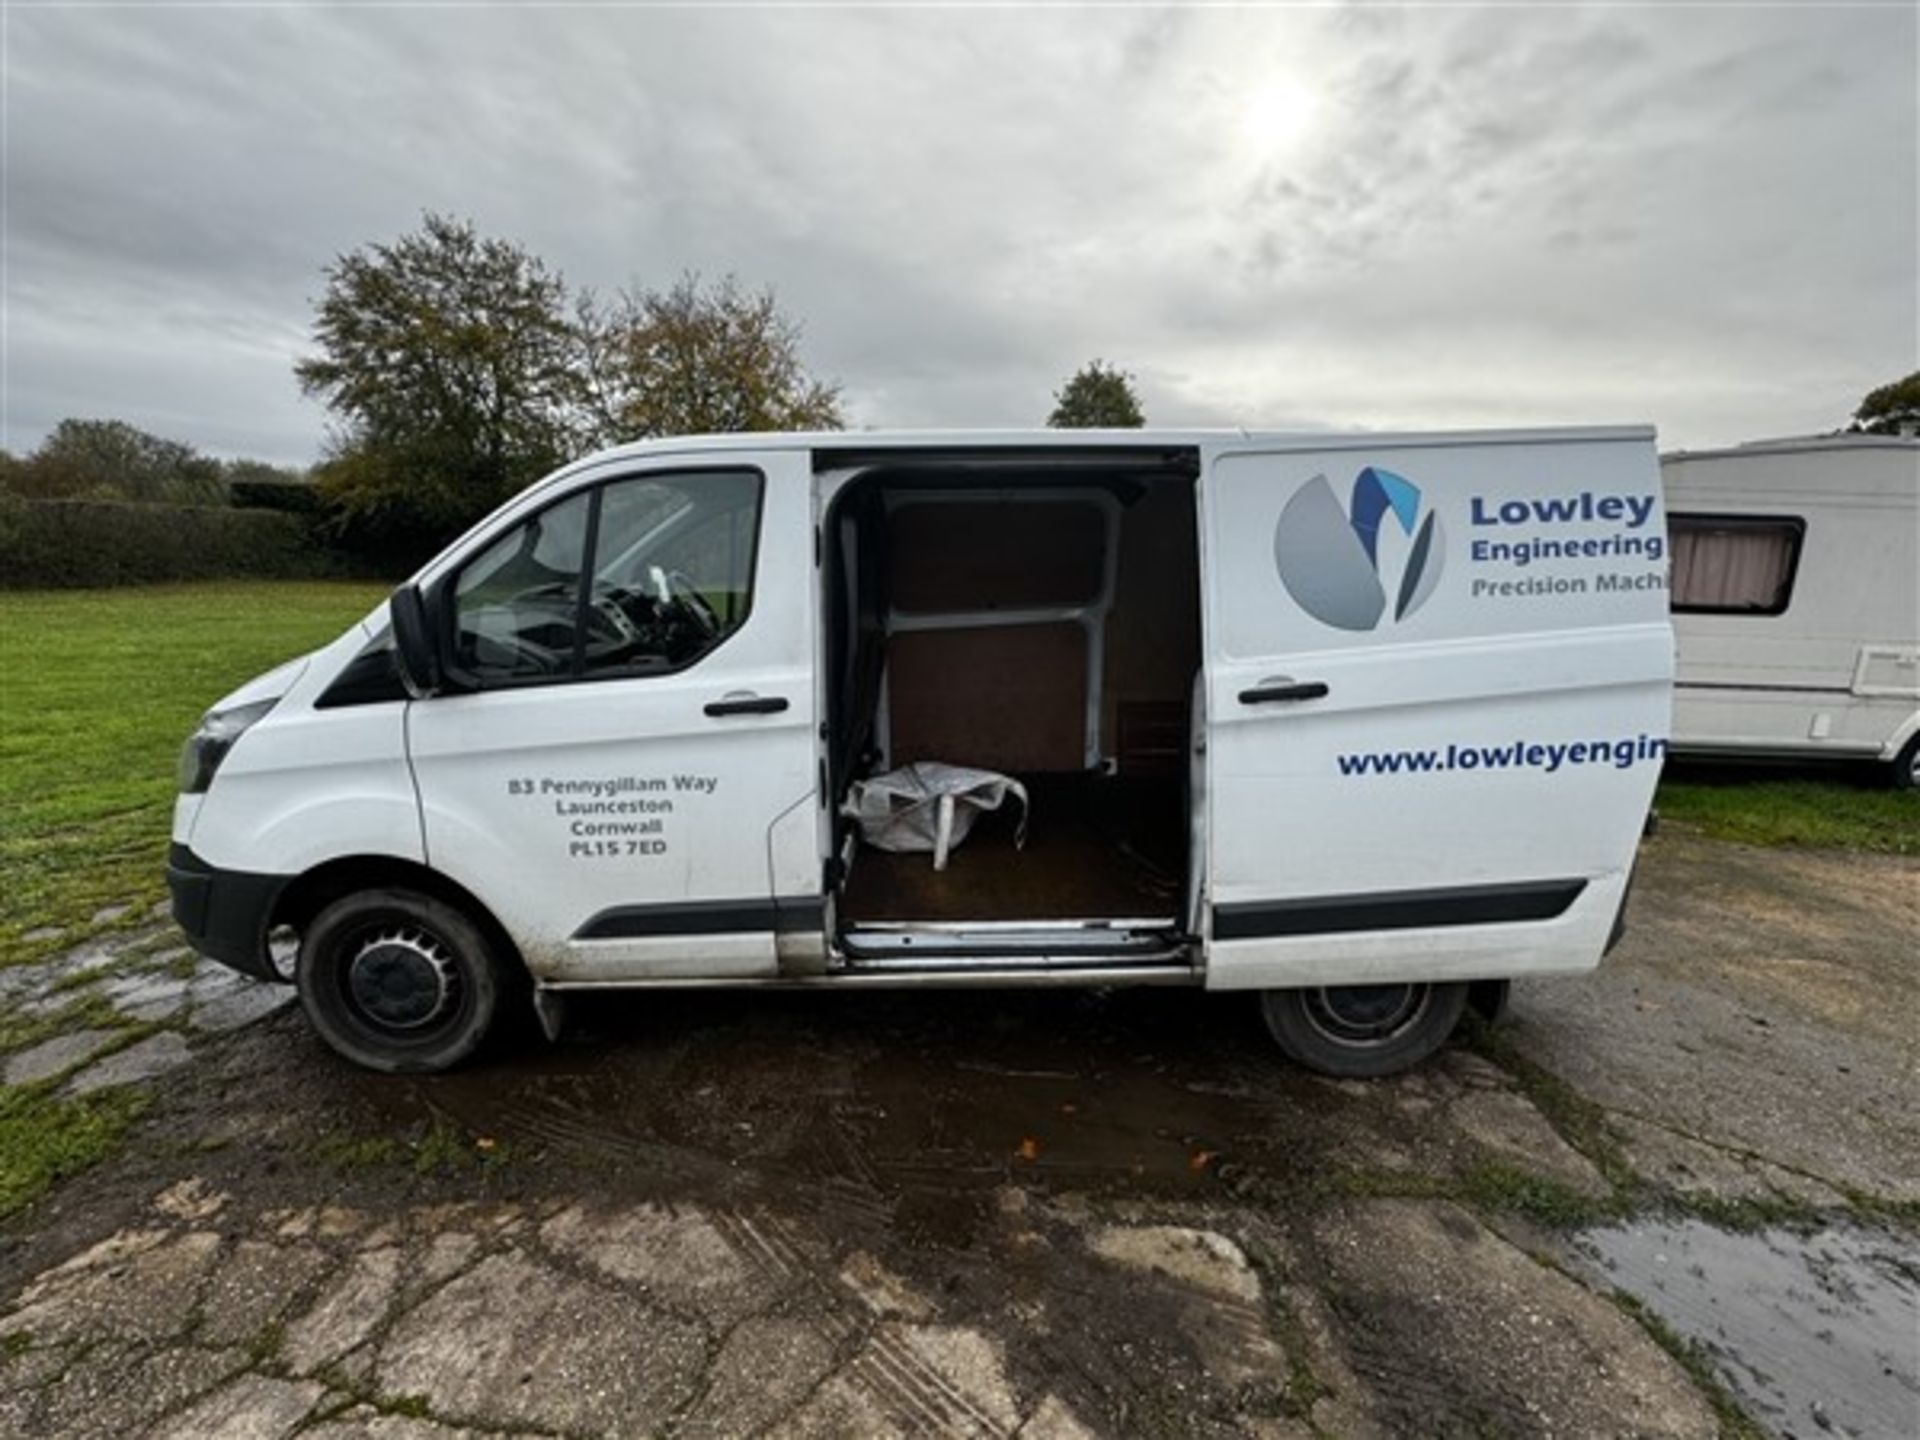 Ford Transit Custom 270 Eco-Tech, reg no. YK16 BYP mileage 227,019, two keys, V5 - yes, missing gear - Image 10 of 14